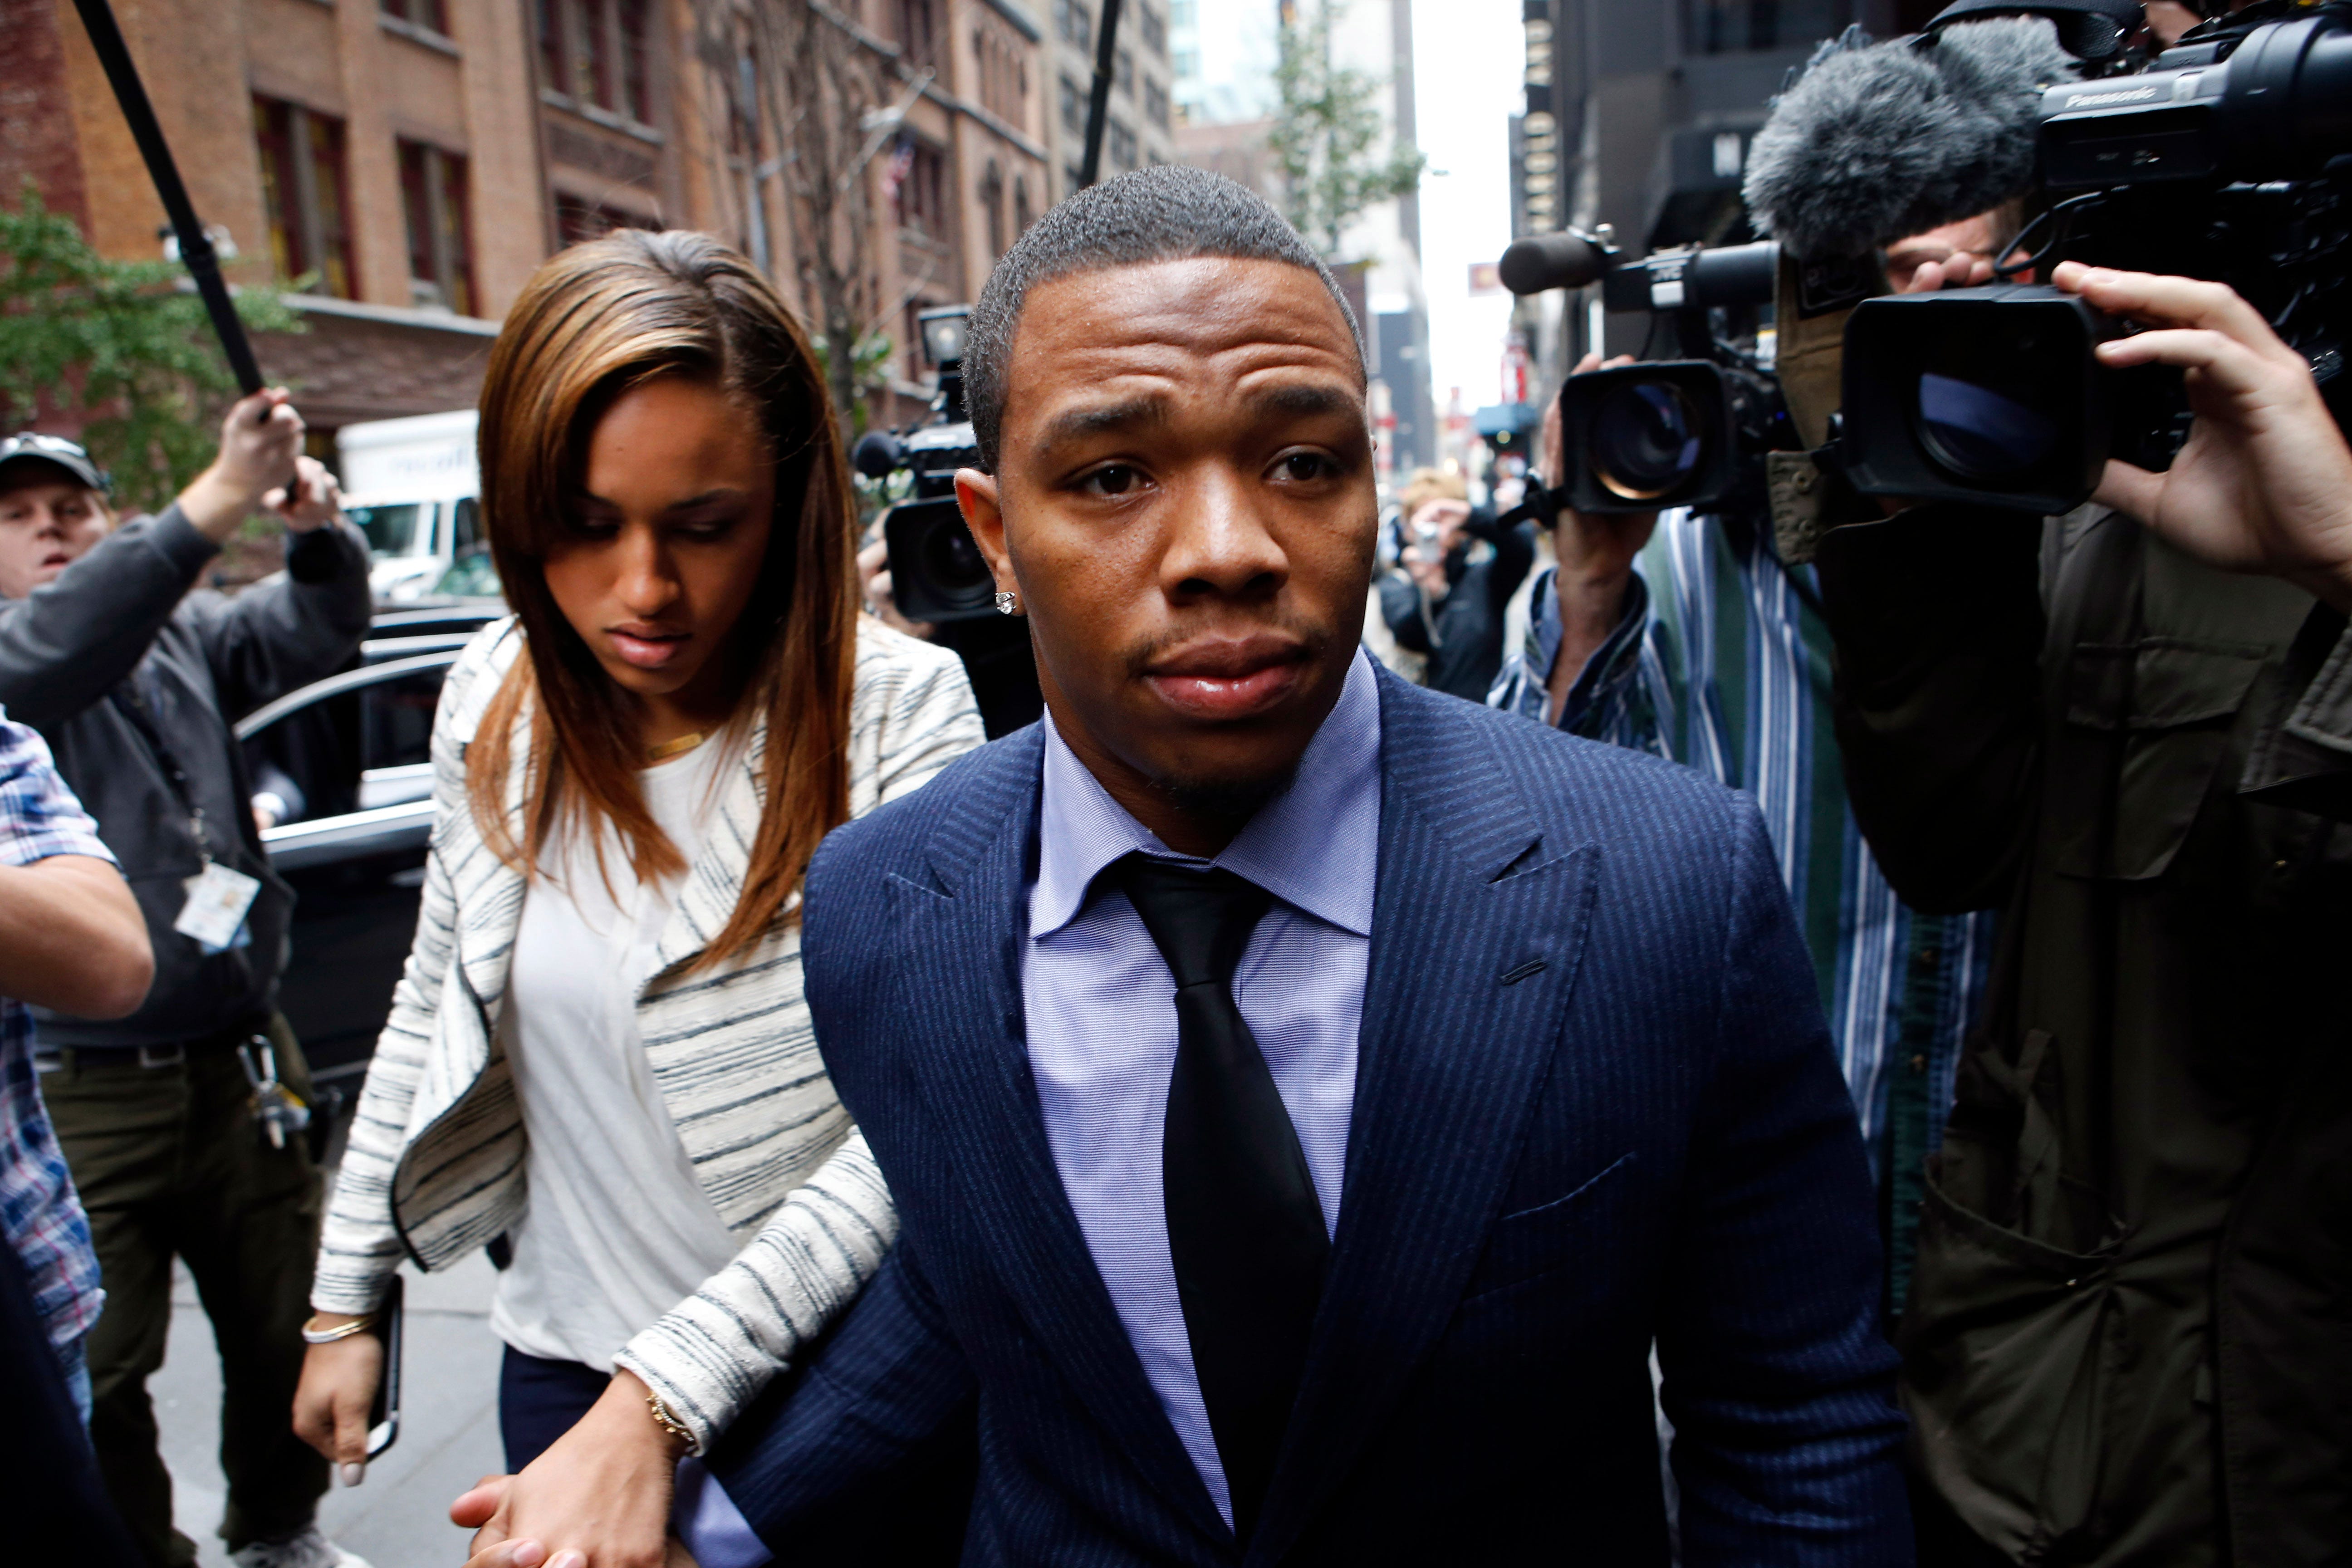 Nfl How The Ray Rice Video Has Changed Our Views On Domestic Violence